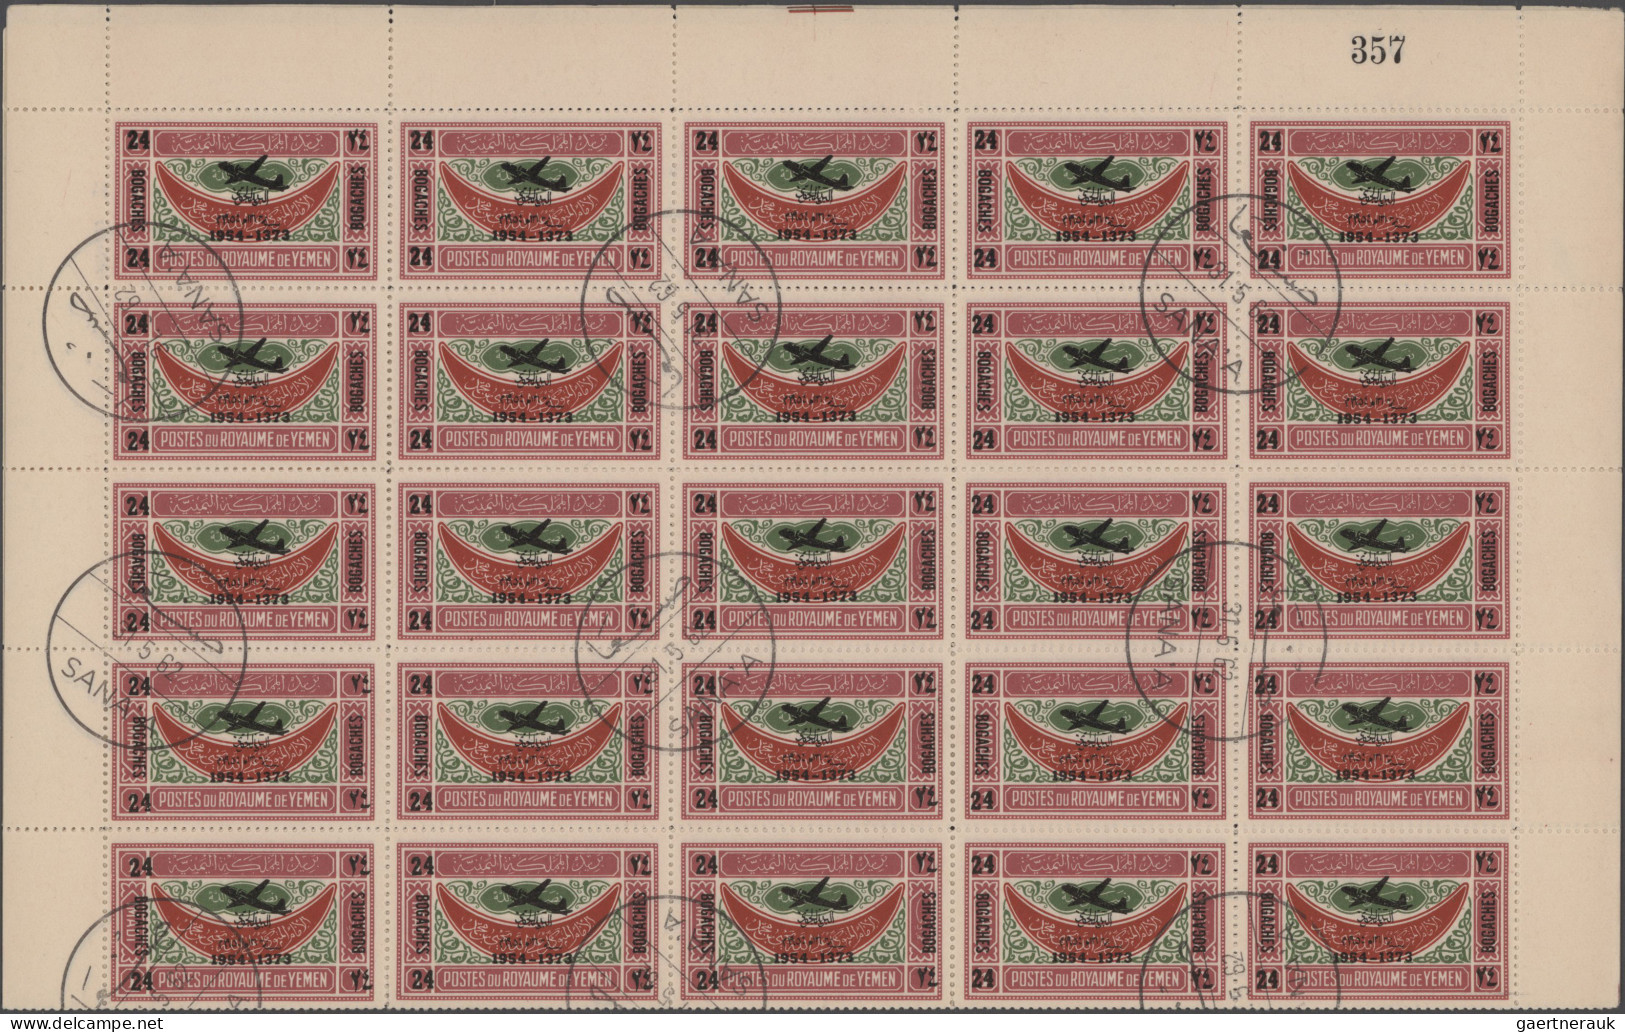 Yemen: 1954, Provisionals, stock of the overprint "airplane, year dates and curr